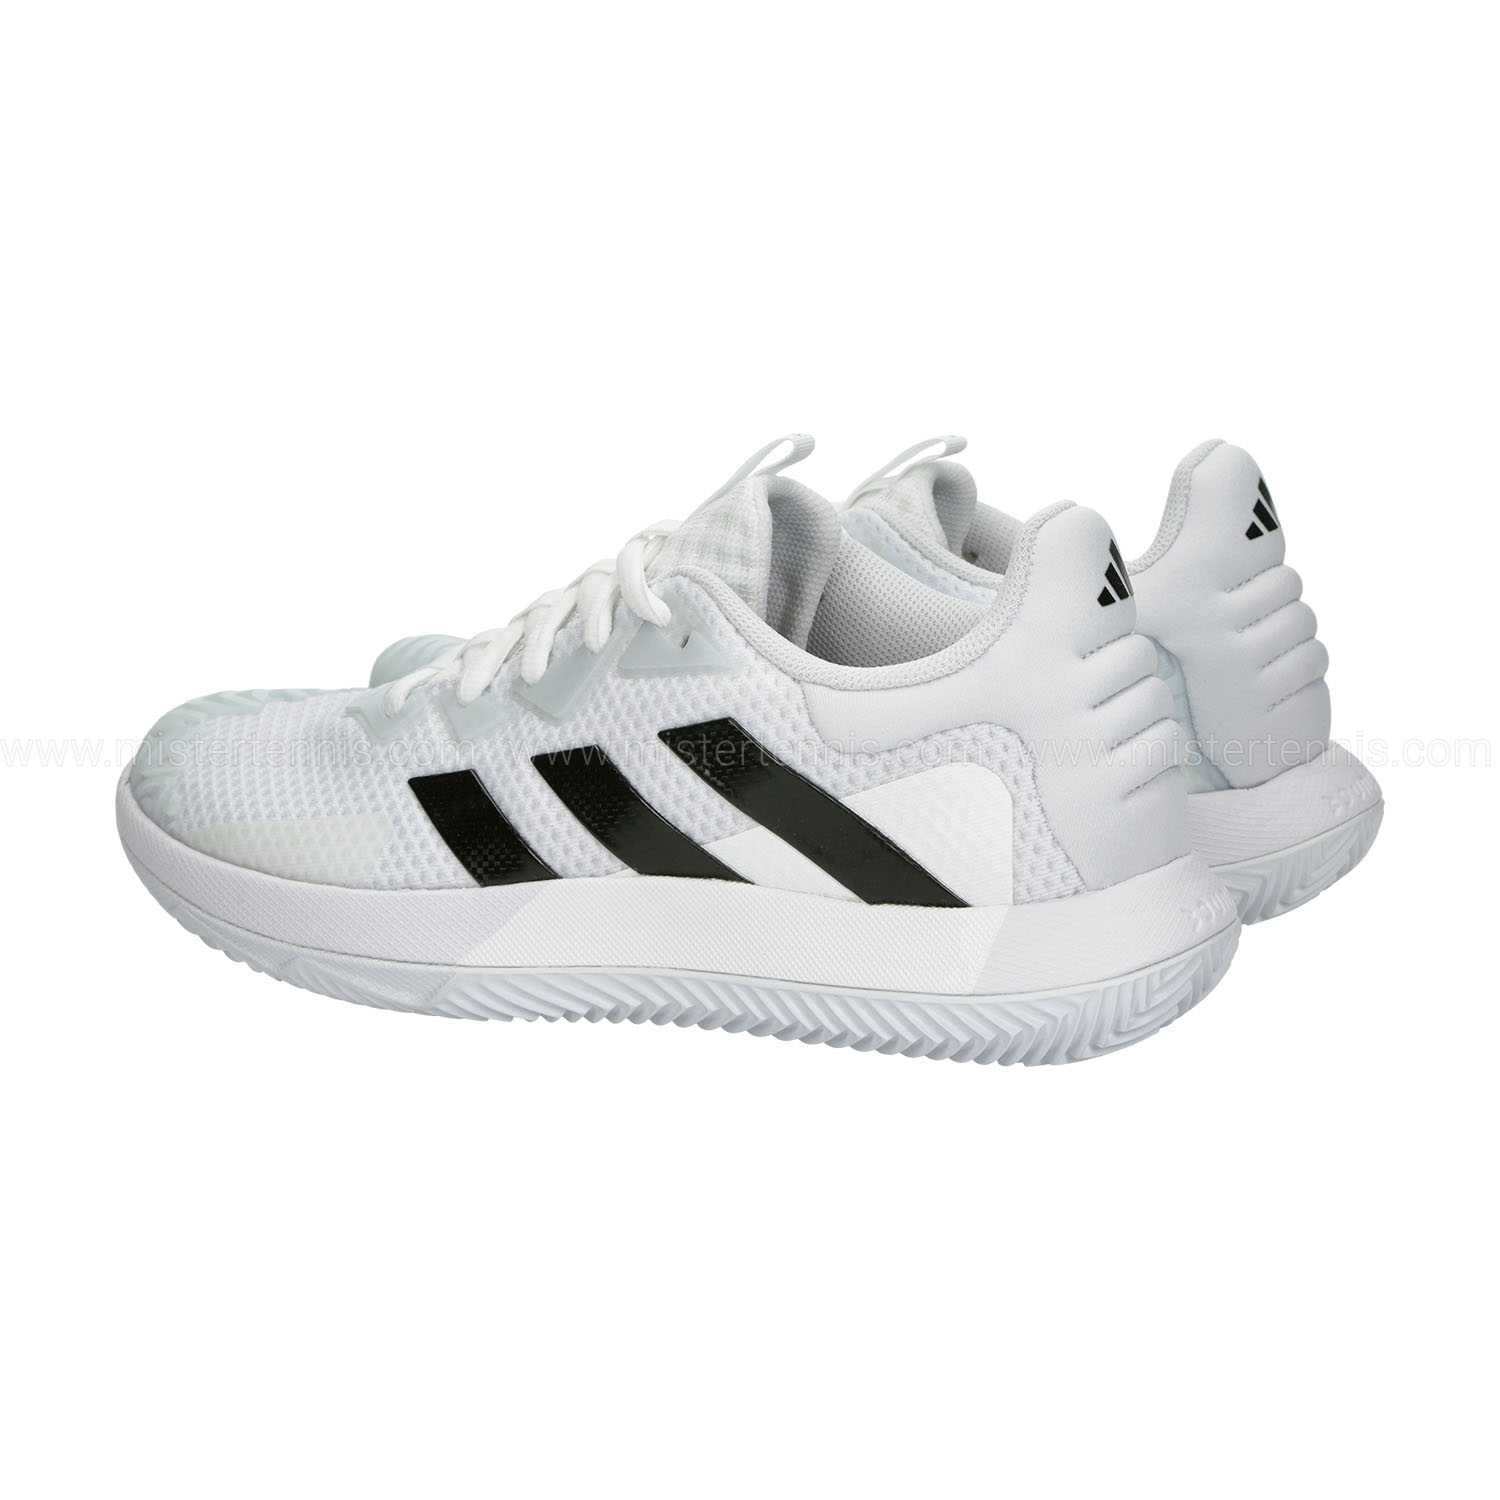 adidas SoleMatch Control Clay - FTWR White/Core Black/Matte Silver